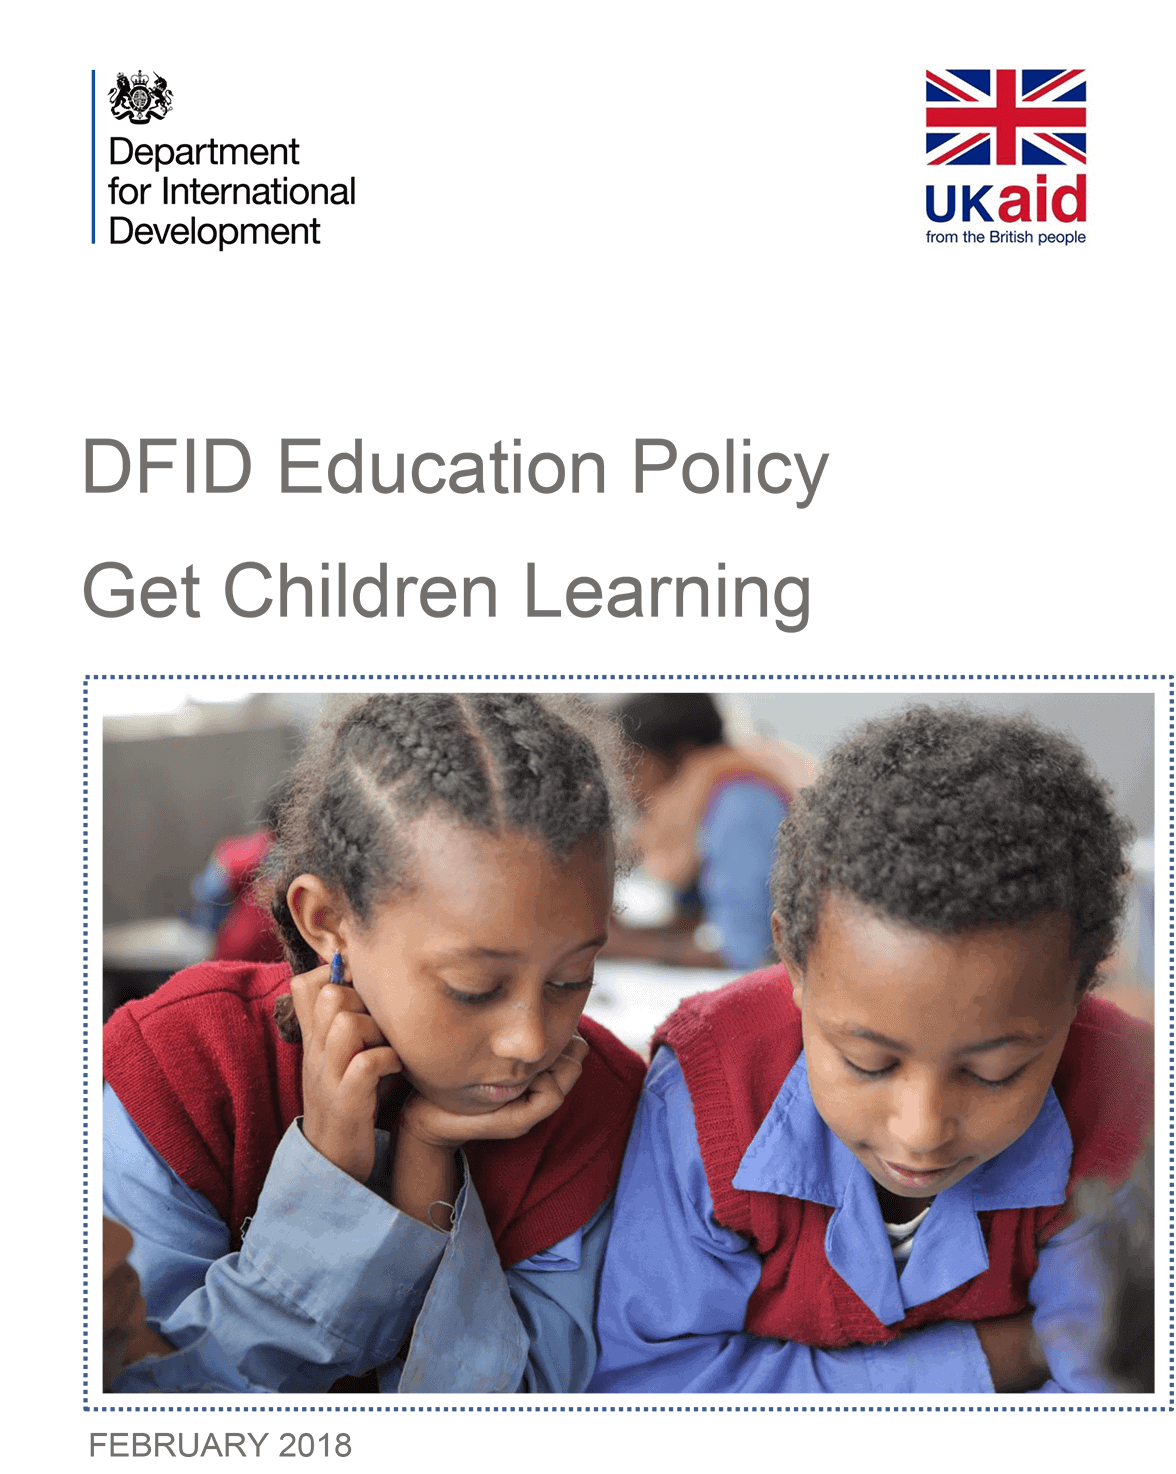 Get Children Learning – DFID Education Policy 2018